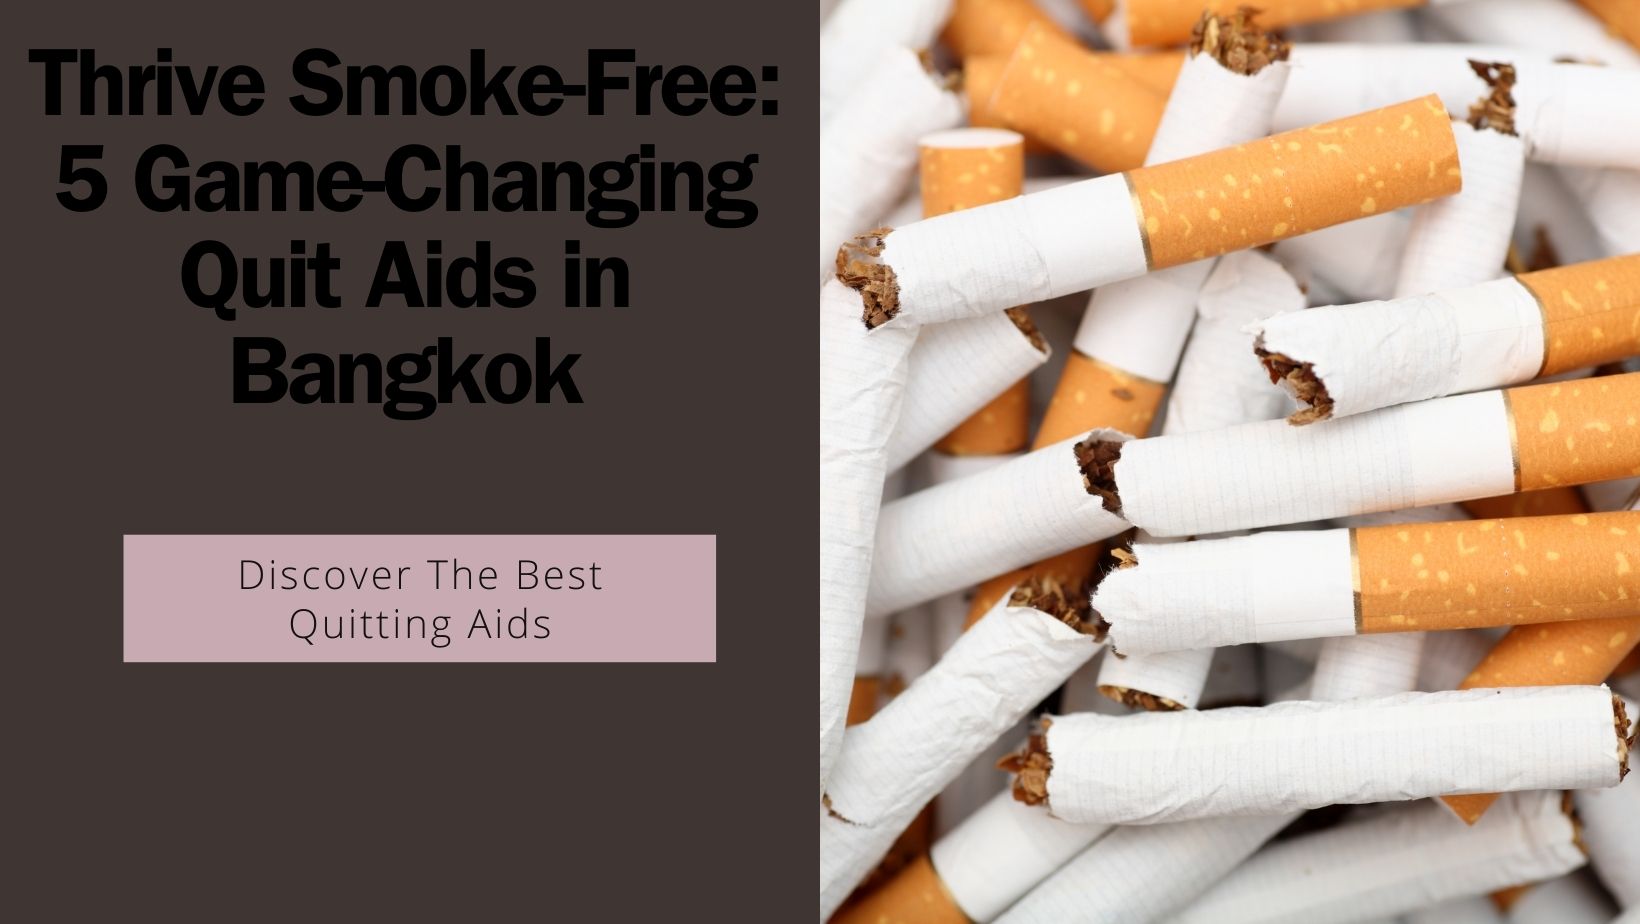 Pile of broken cigarettes with 'Thrive Smoke-Free: 5 Game-Changing Quit Aids in Bangkok' banner above